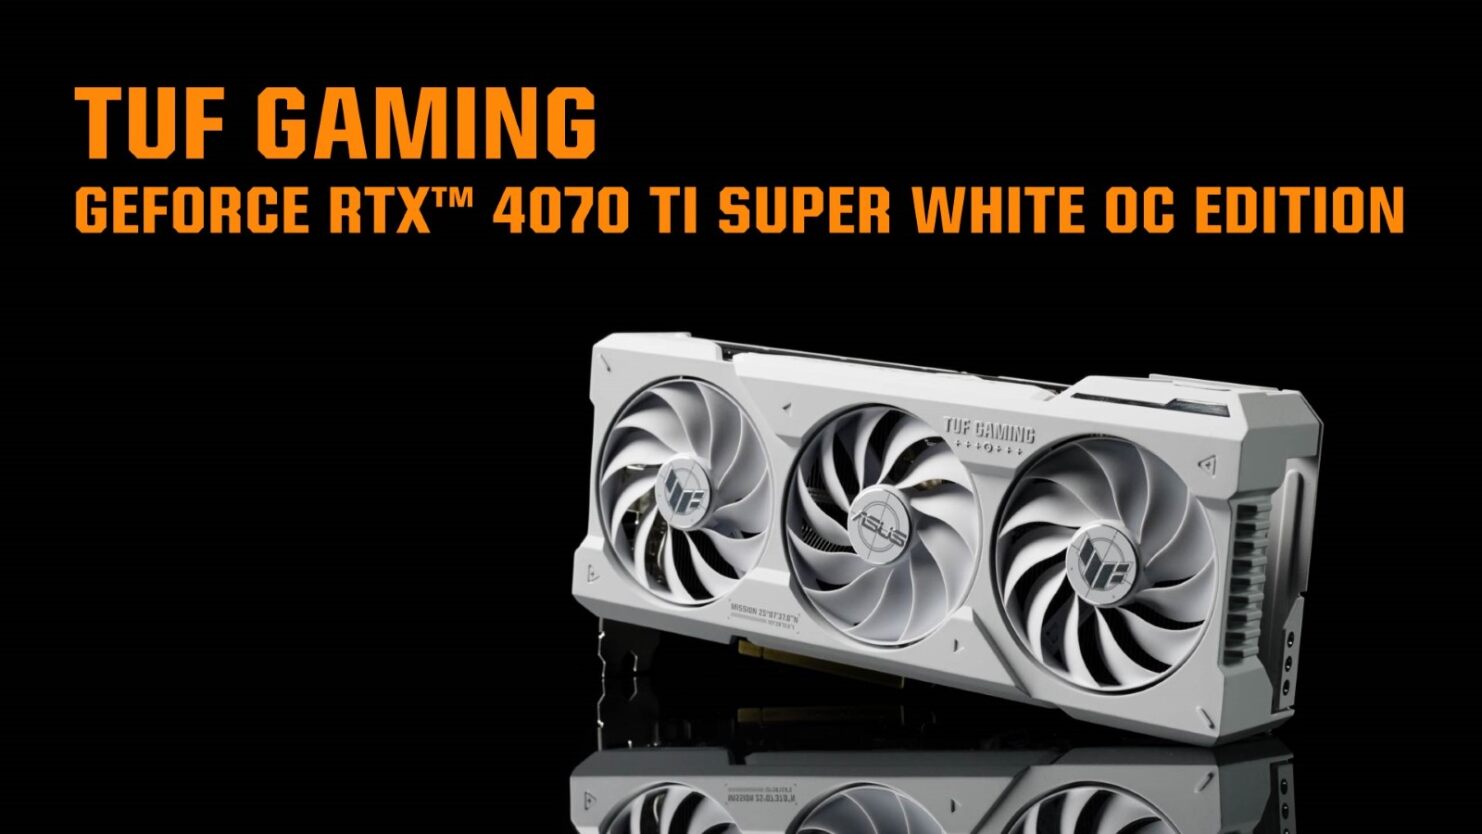 A large marketing image providing additional information about the product ASUS GeForce RTX 4070 Ti SUPER TUF Gaming OC 16GB GDDR6X - White - Additional alt info not provided